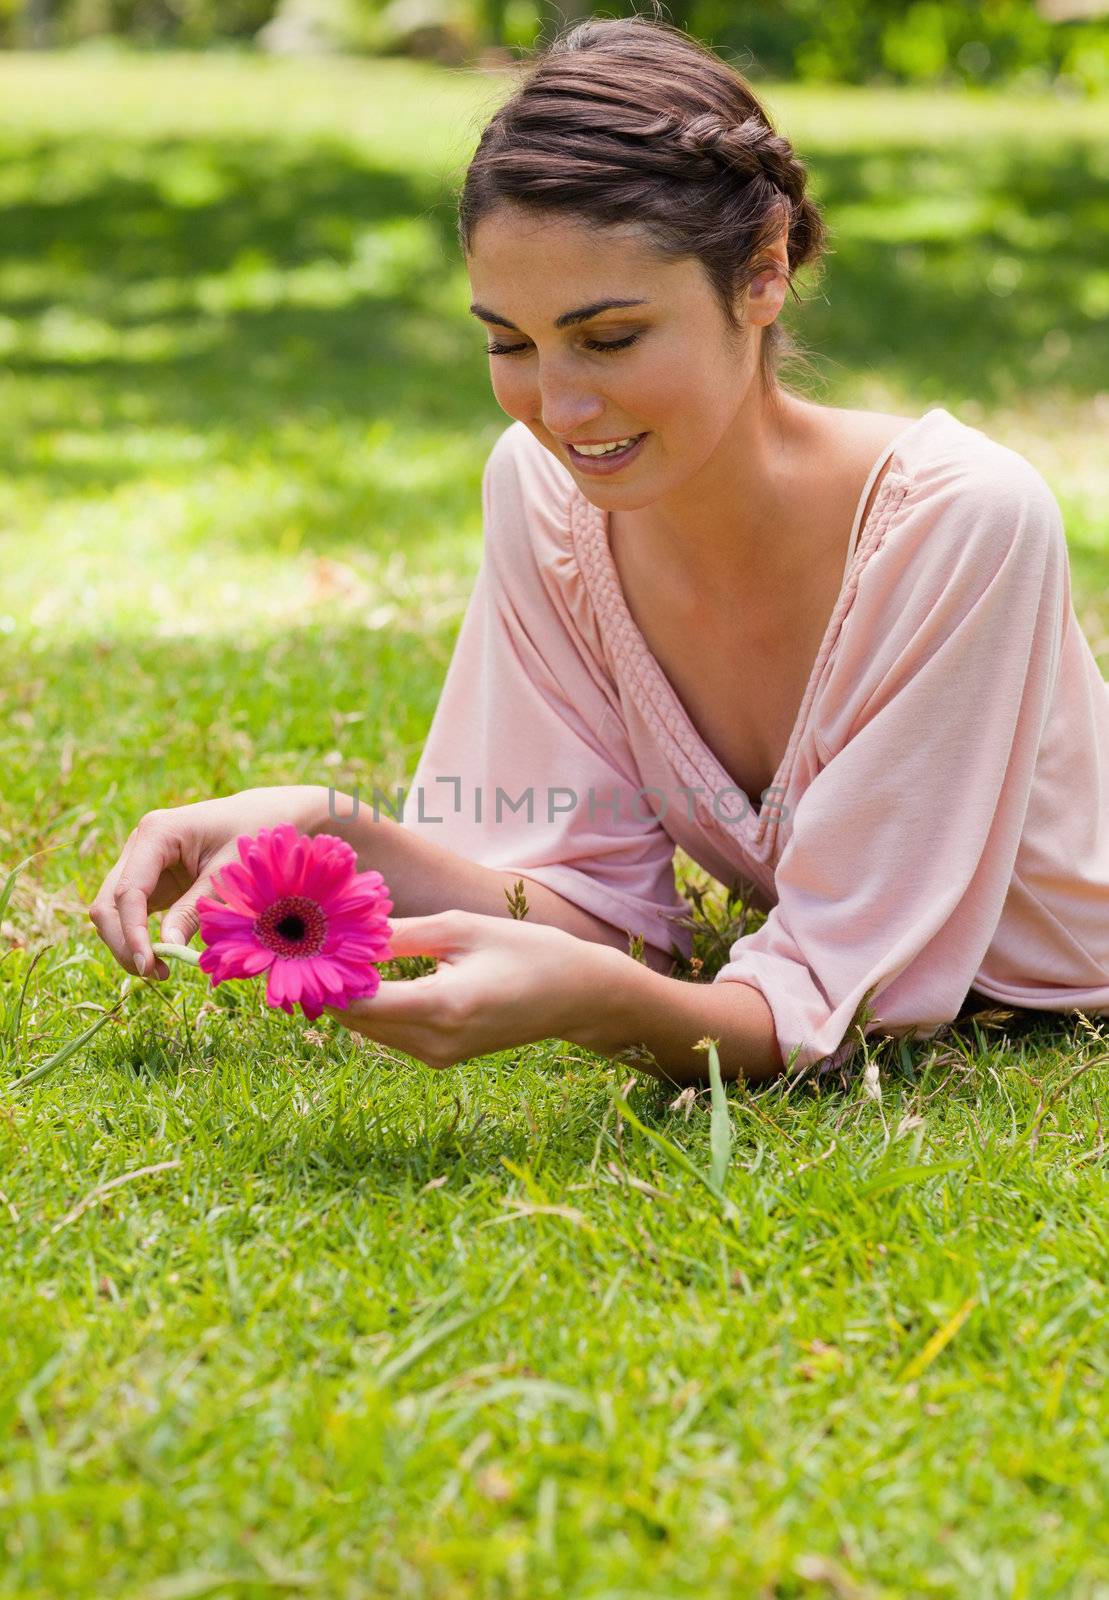 Smiling woman holding a pink flower while lying on her front in grass